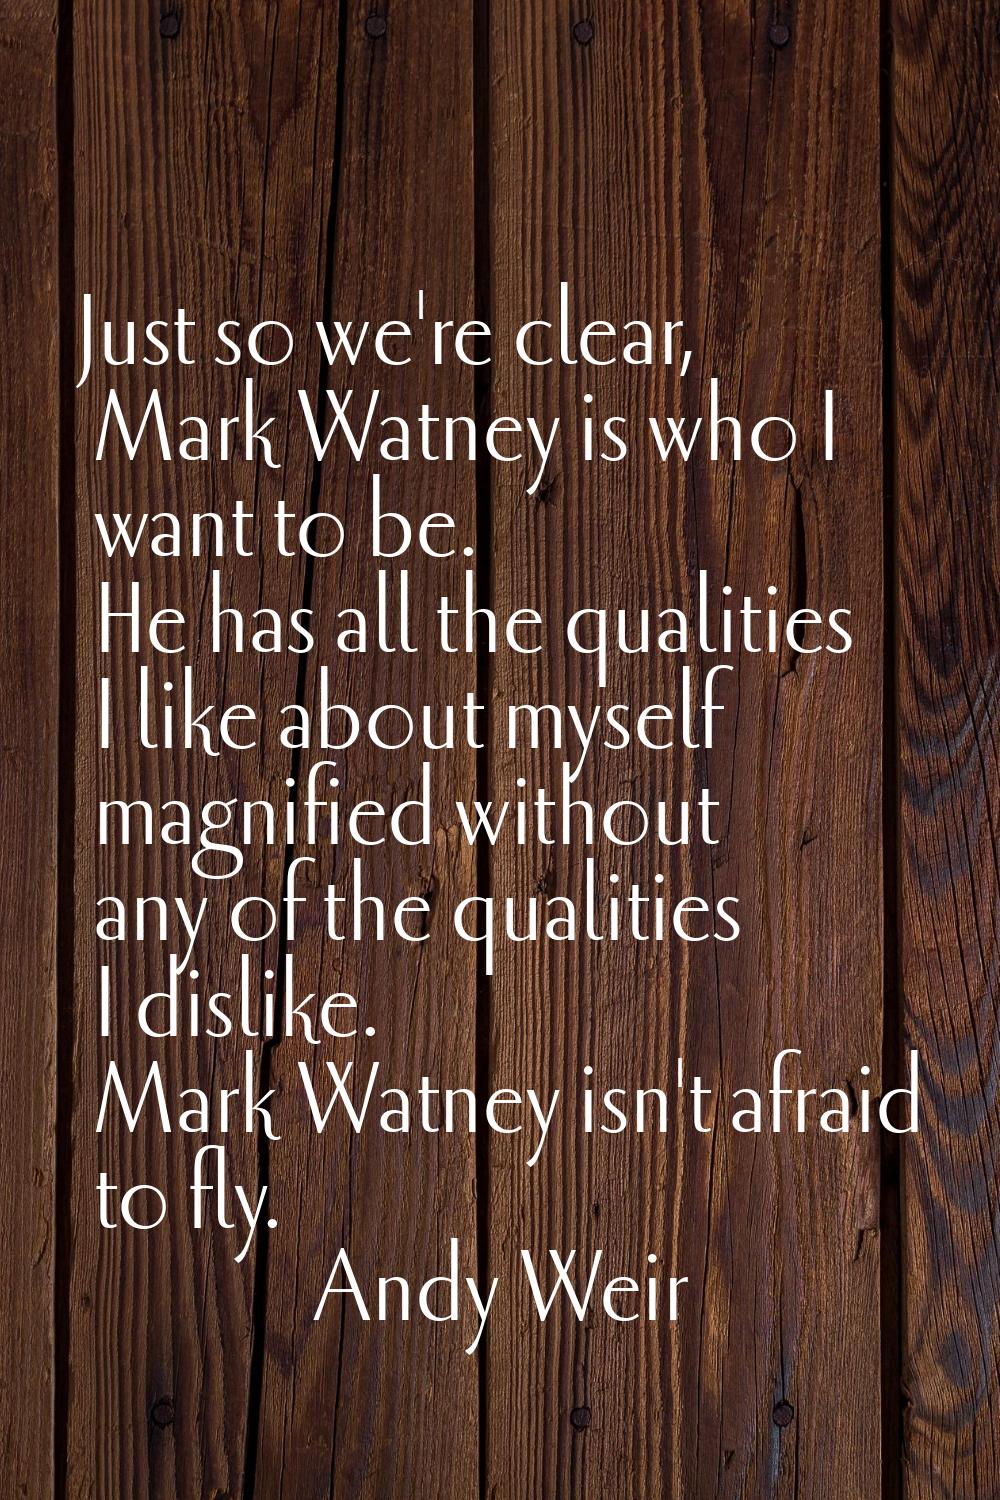 Just so we're clear, Mark Watney is who I want to be. He has all the qualities I like about myself 